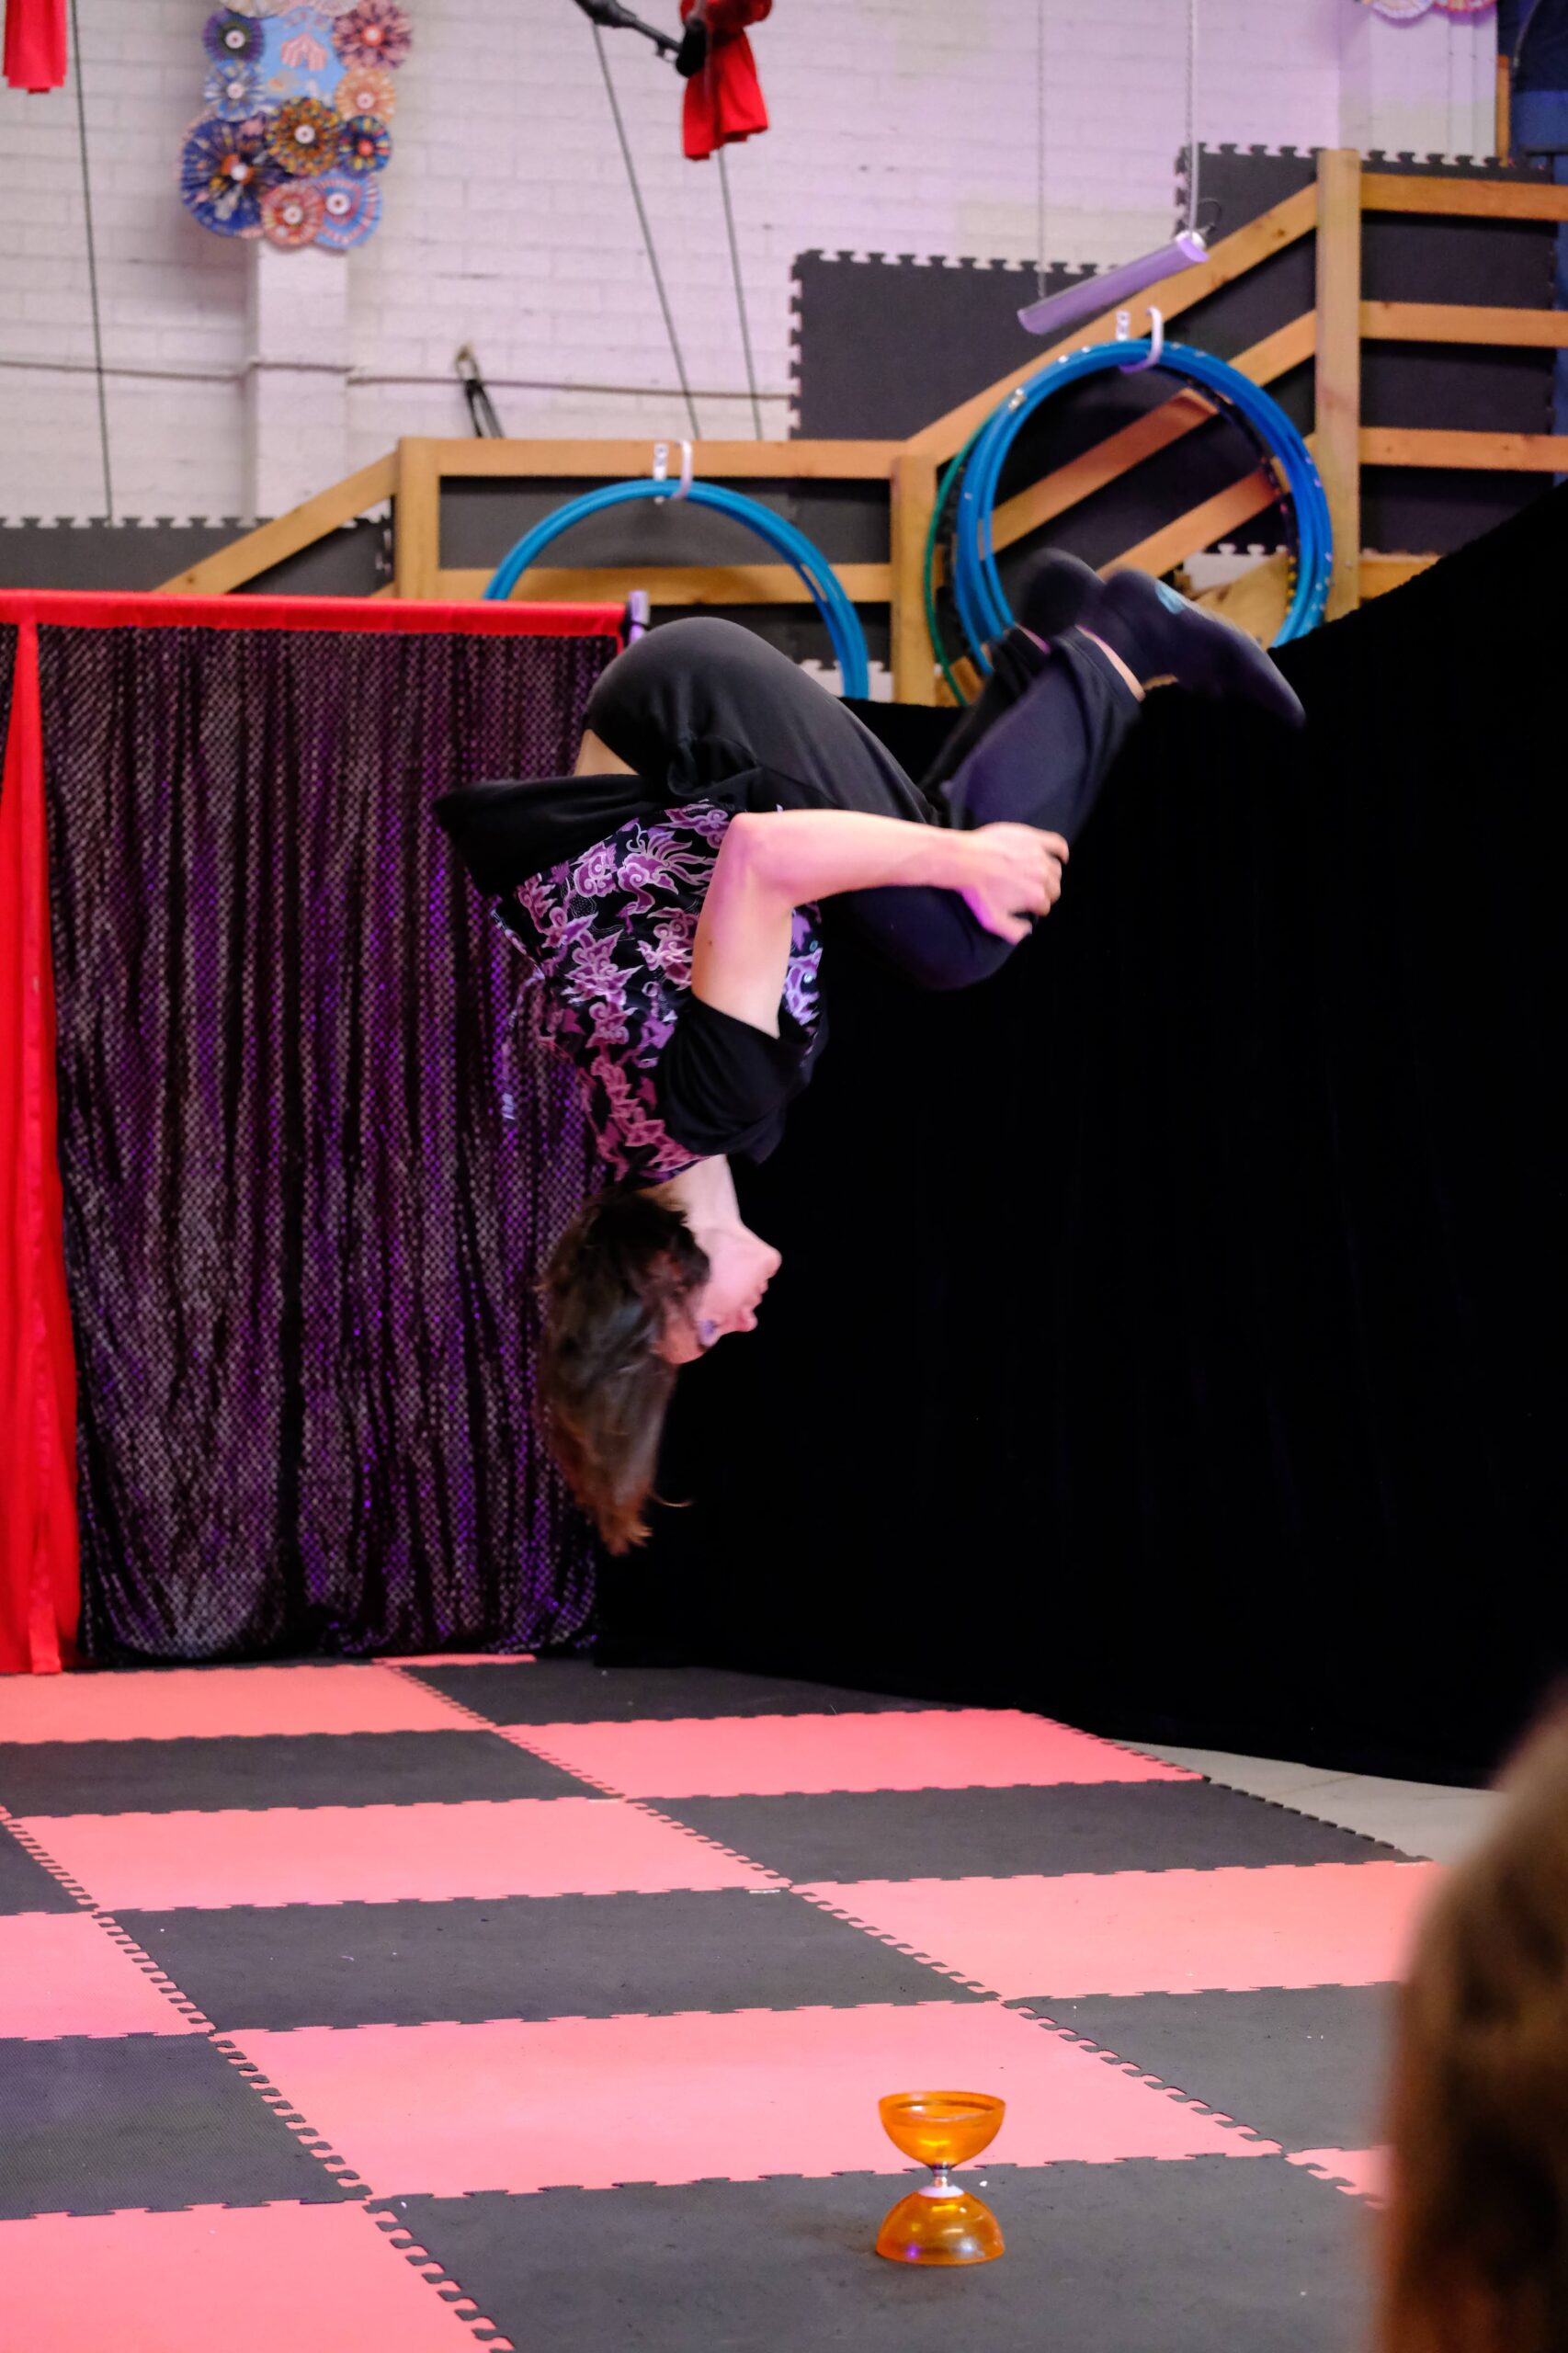 Tumbling is a classic circus skill and at Roundabout Circus we love seeing our students improve. Here we have one of our teens performing a somersault on our mats.